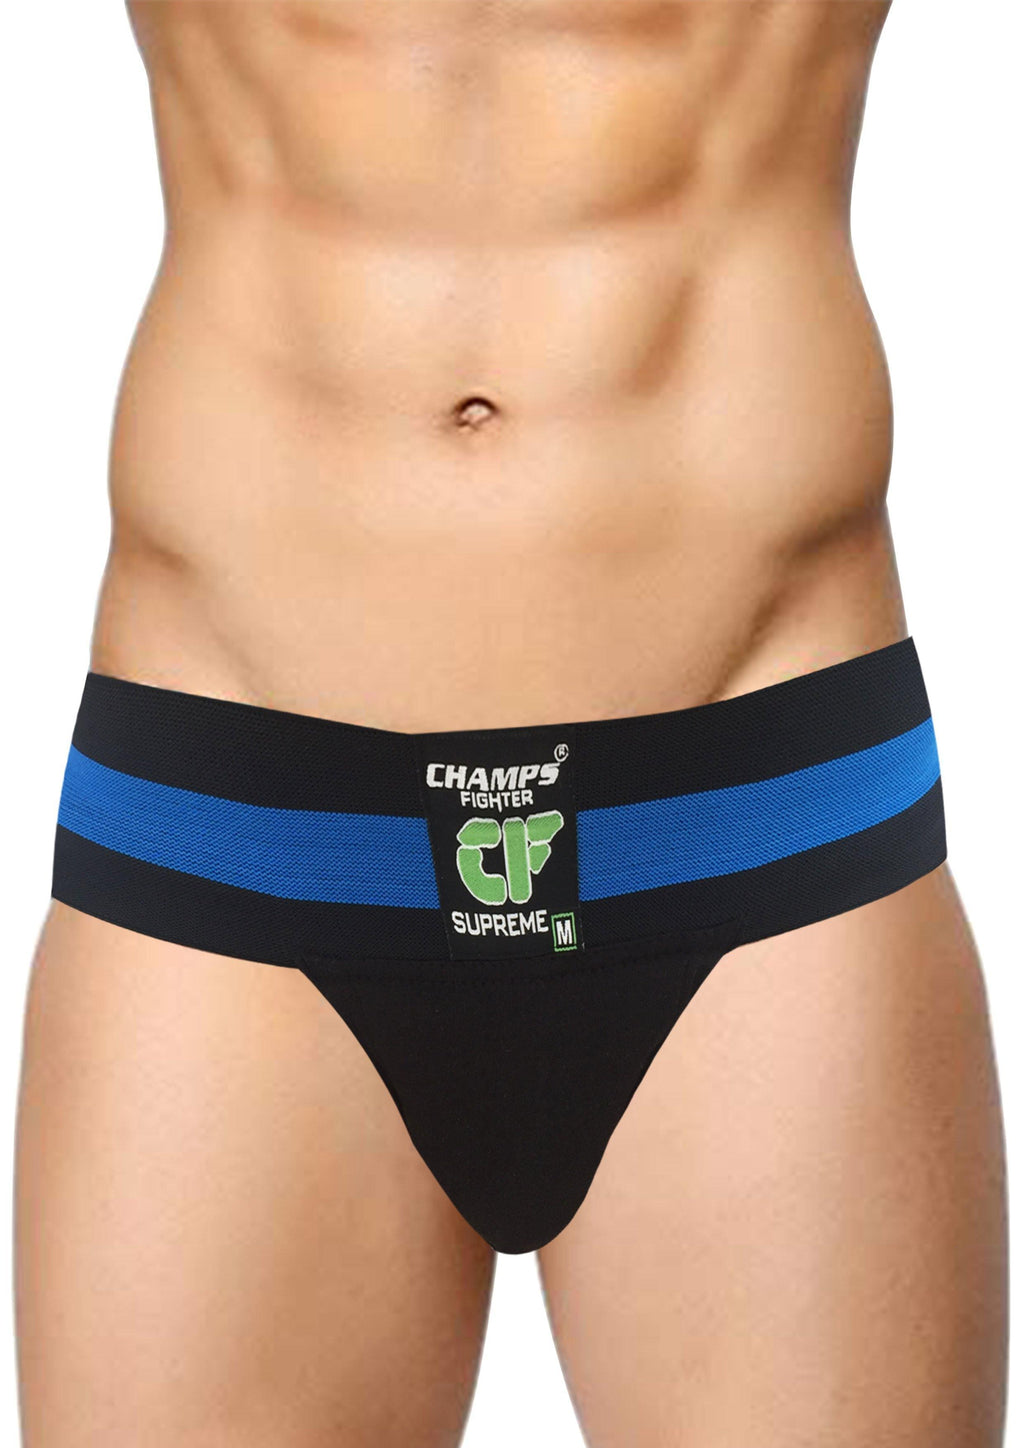 Stay Dry & Supported: Men's Athletic Supportive Briefs – Designer mart